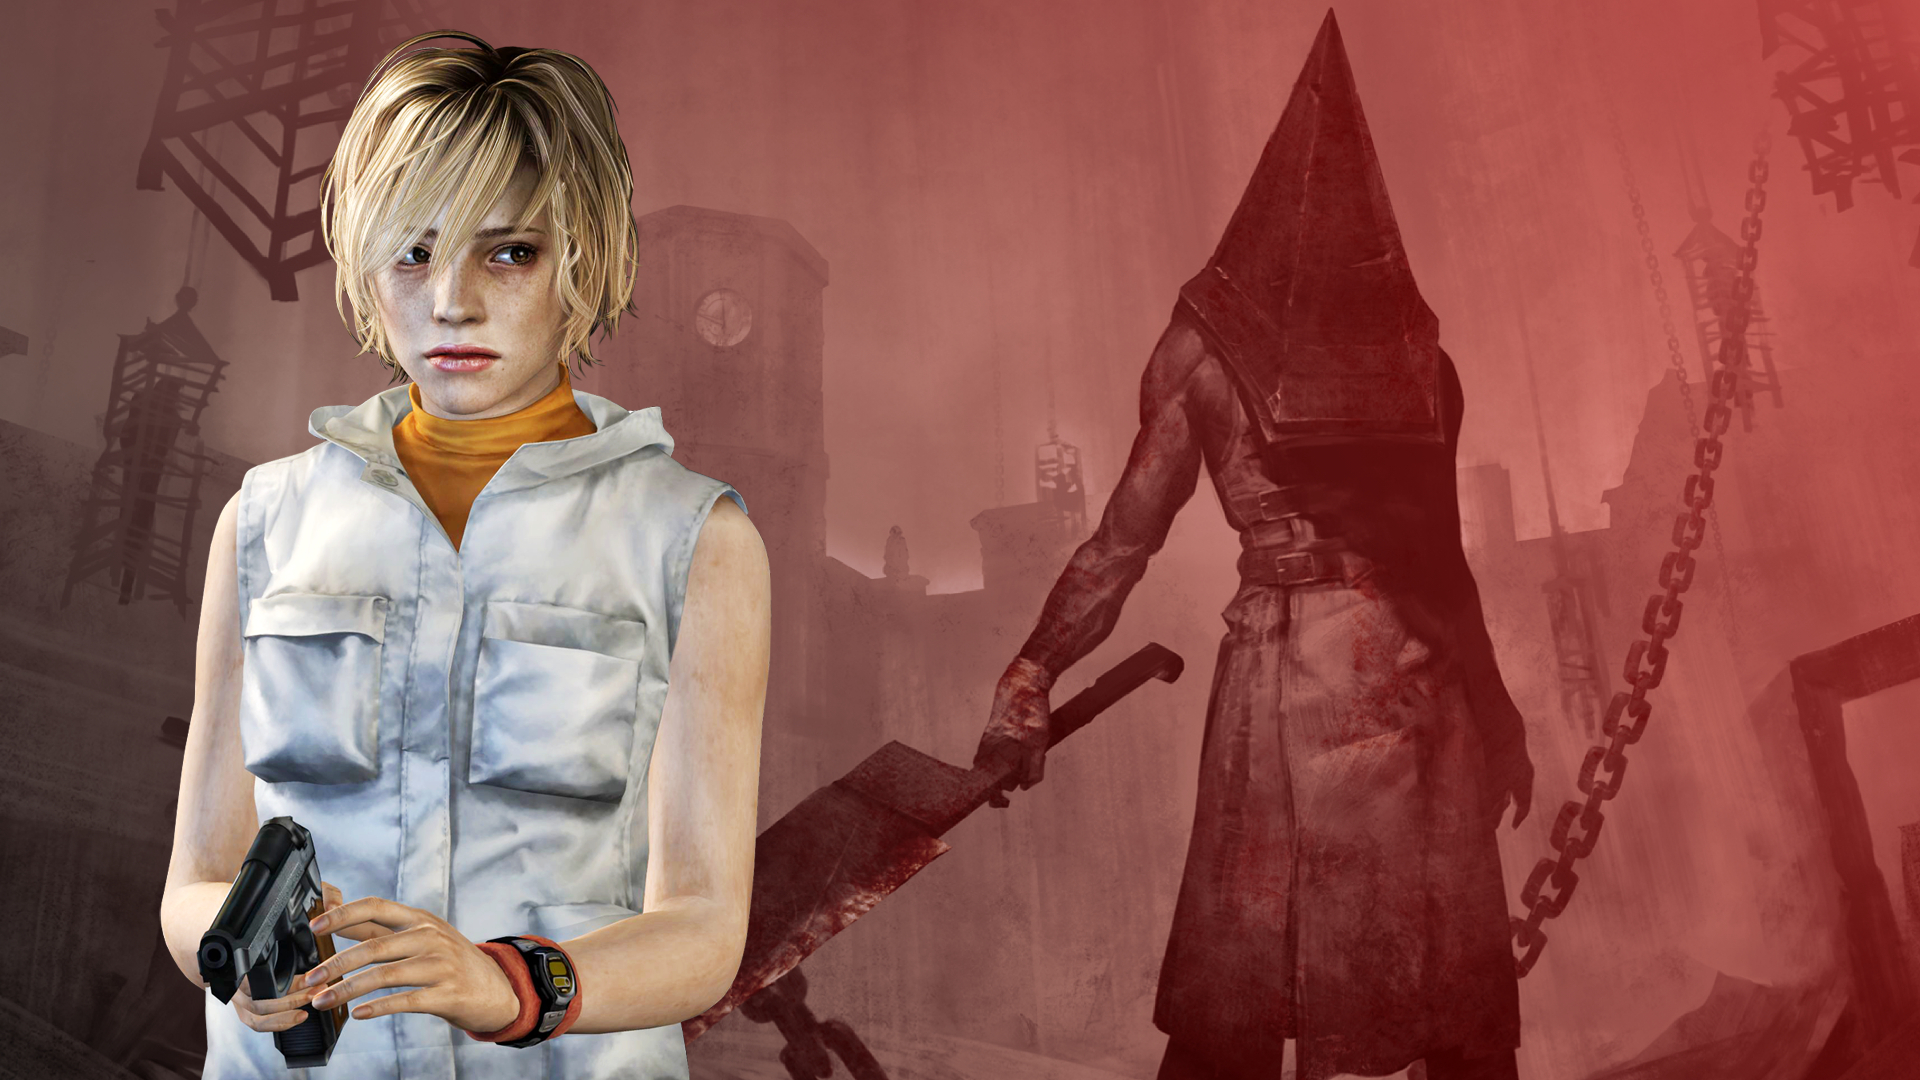 Three mysterious new Silent Hill games are in development